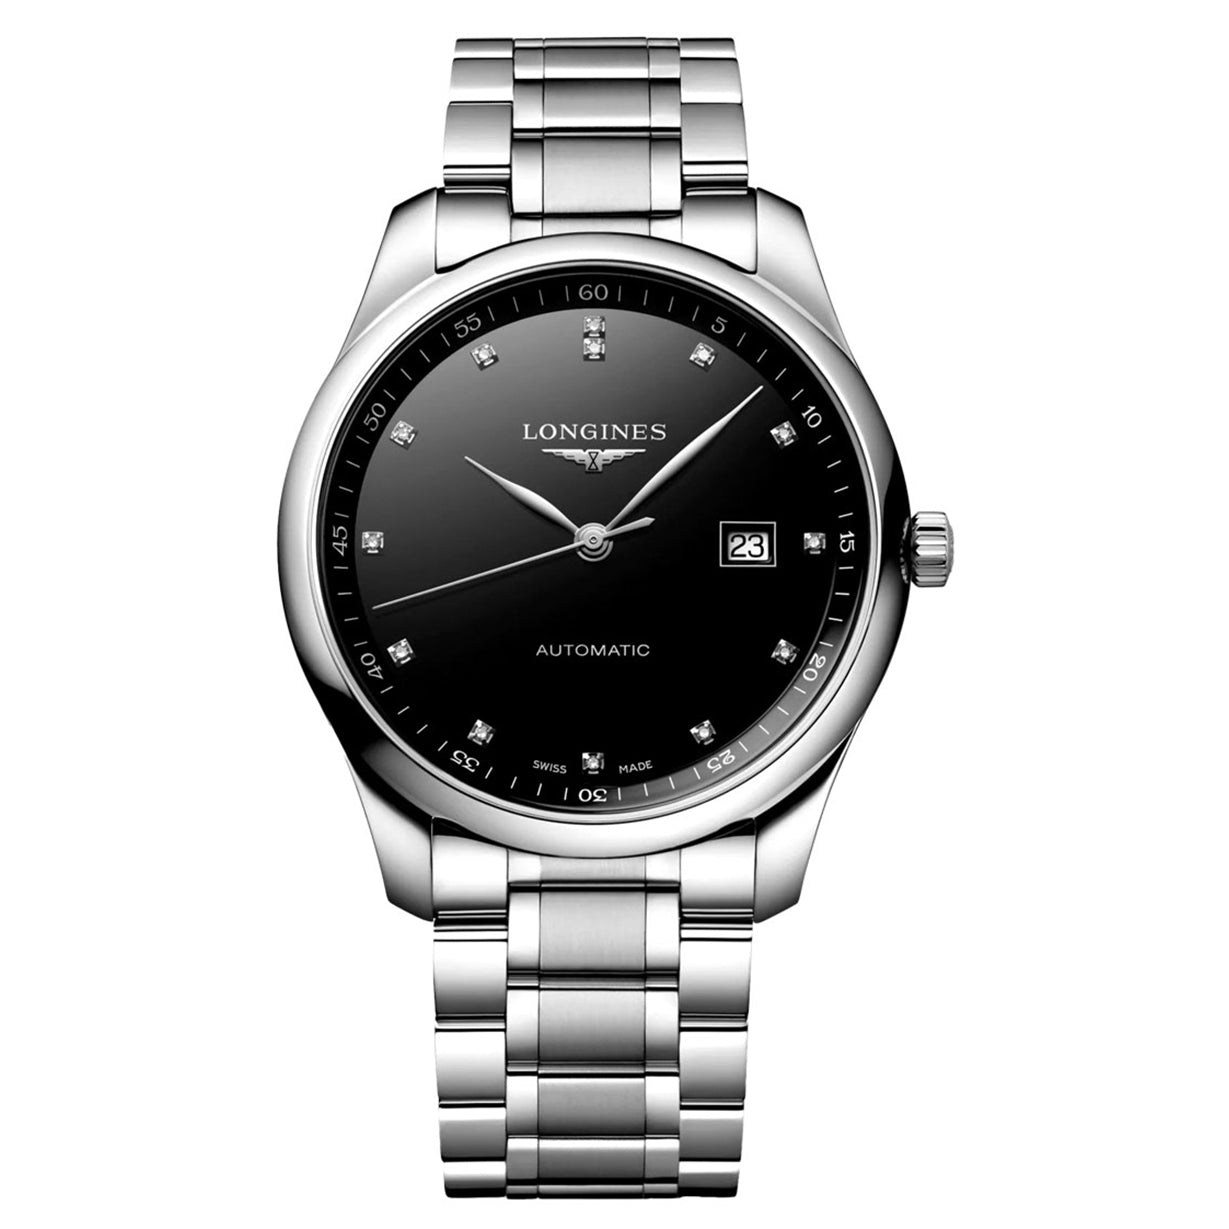 The Longines Master Collection Silver Dial